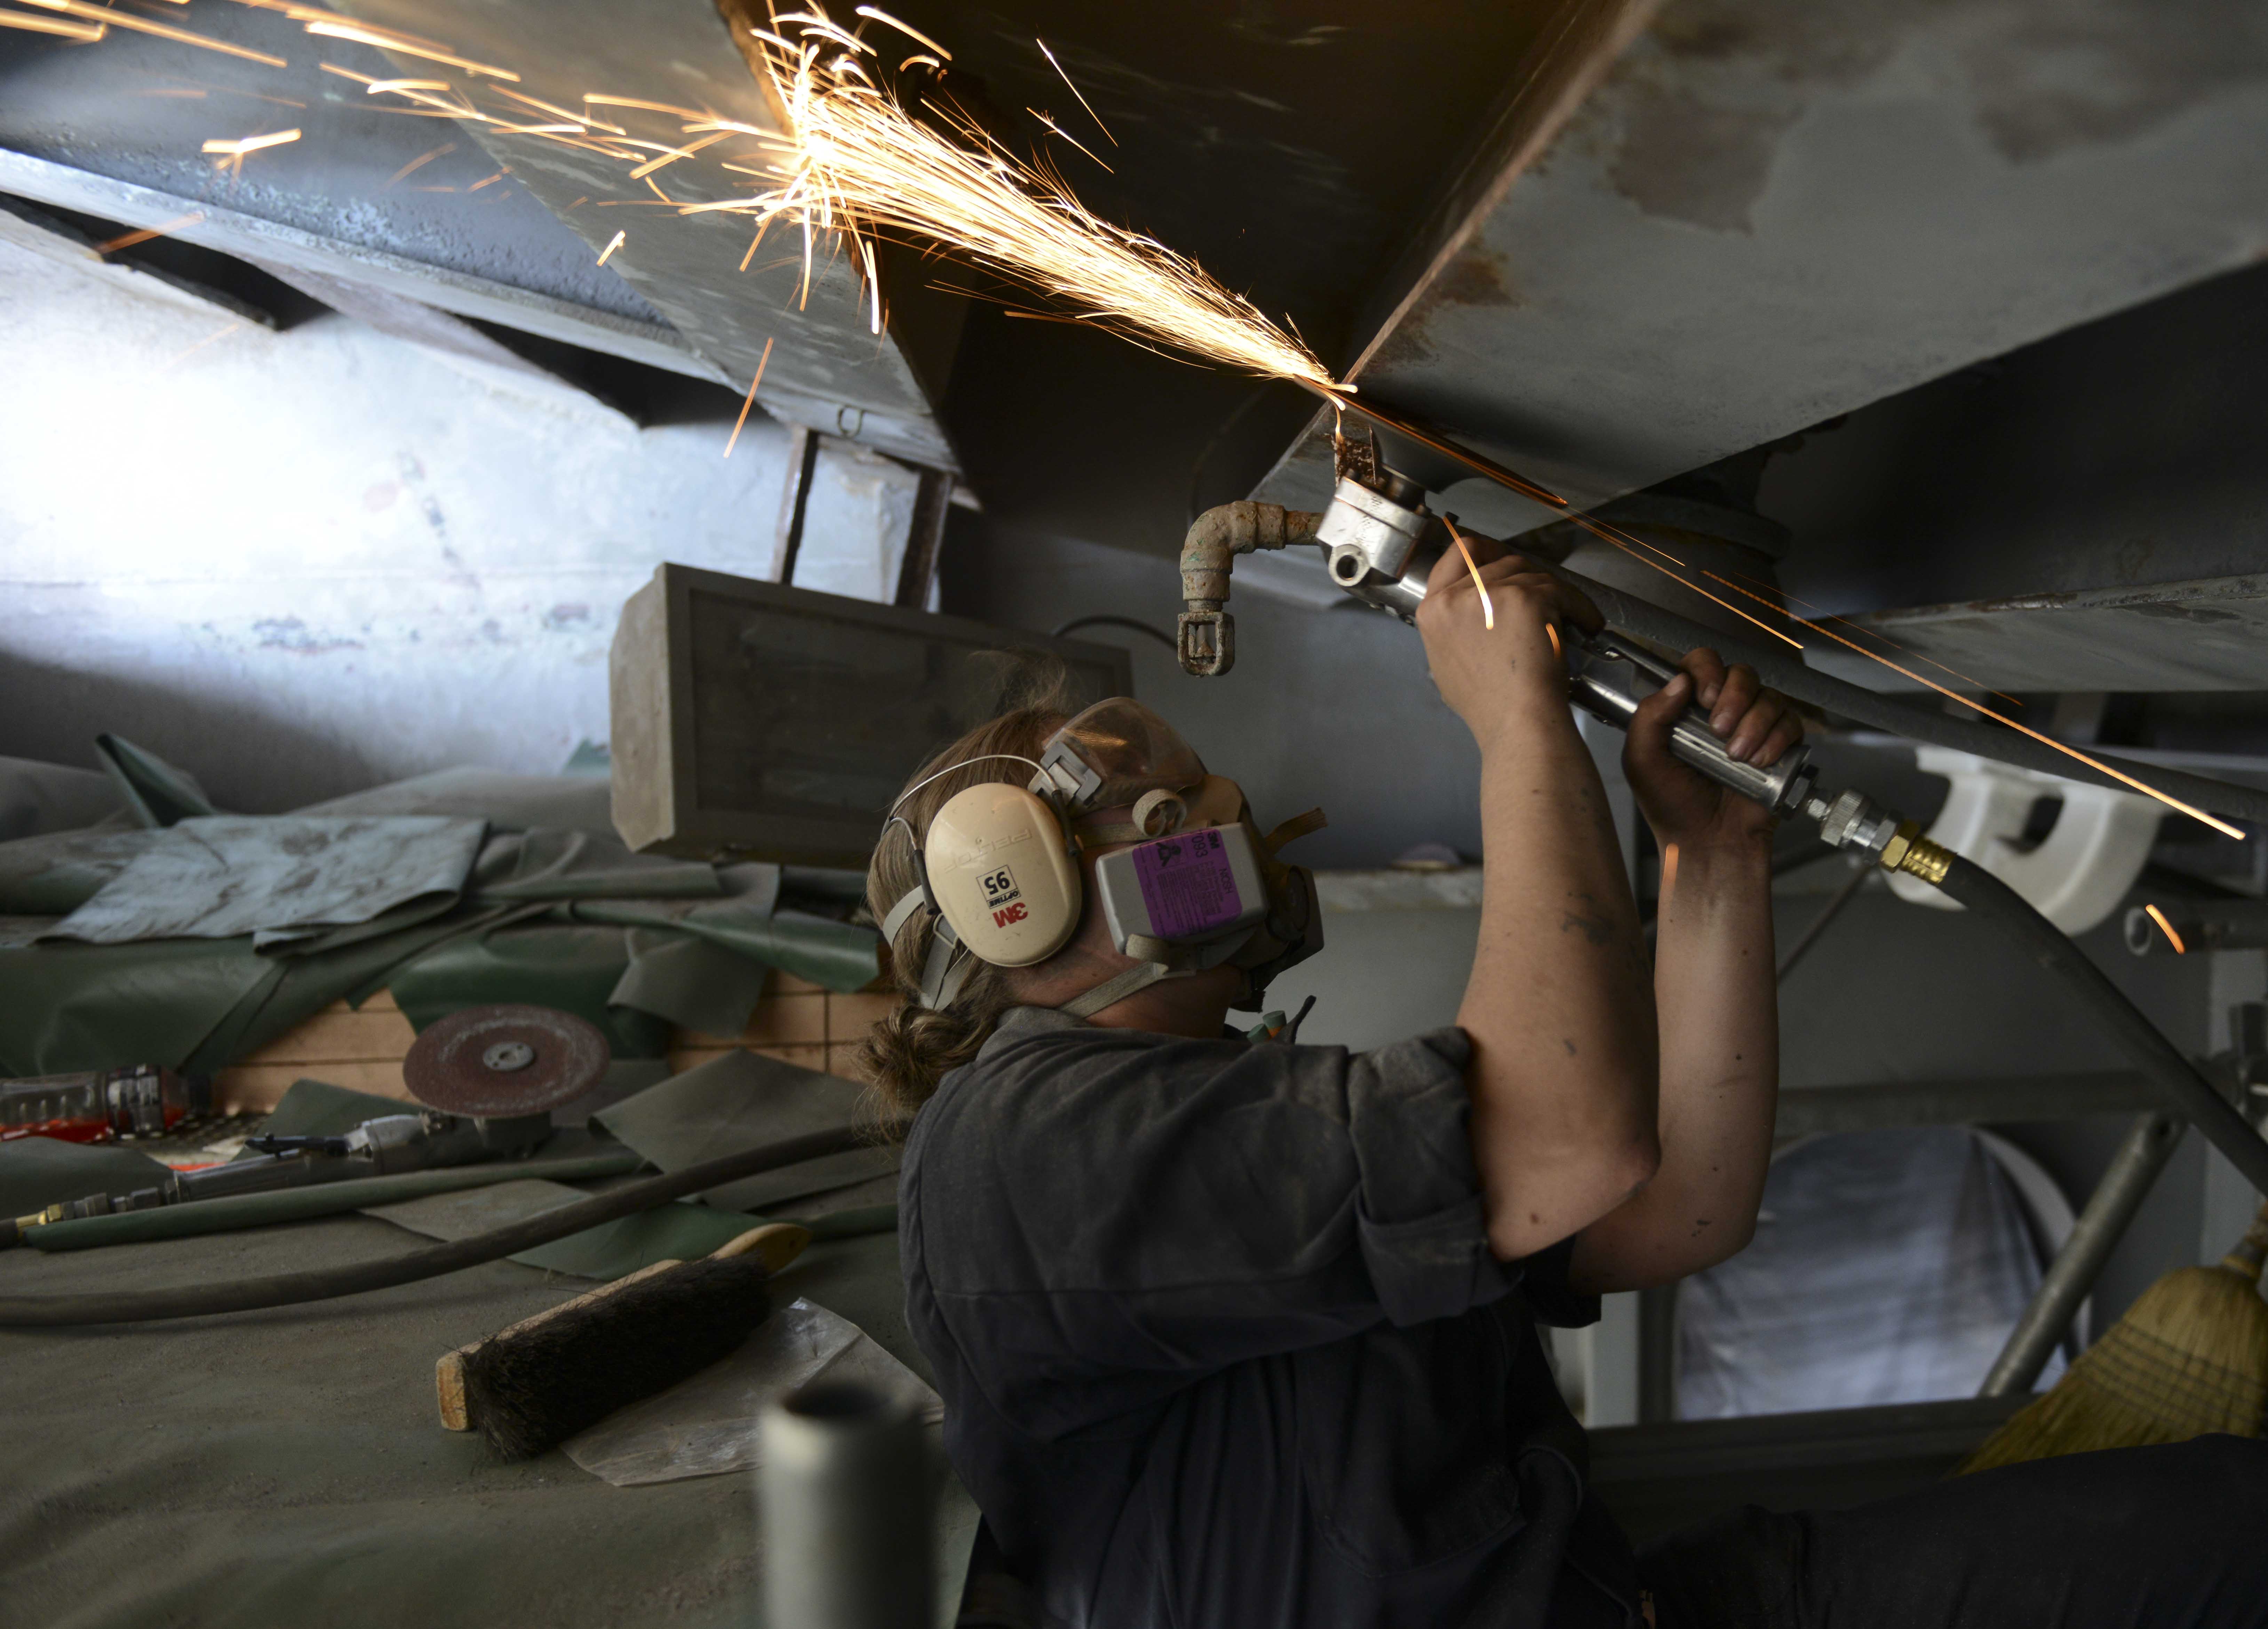 Boatswain’s Mate Seaman Kasey Ringwalda, a native of Dayton, Ore., uses a grinder to remove paint from deck station 11 on board the aircraft carrier USS Nimitz (CVN 68). Nimitz is currently undergoing an extended planned incremental maintenance availability at Puget Sound Naval Shipyard and Intermediate Maintenance Facility. US Navy Photo